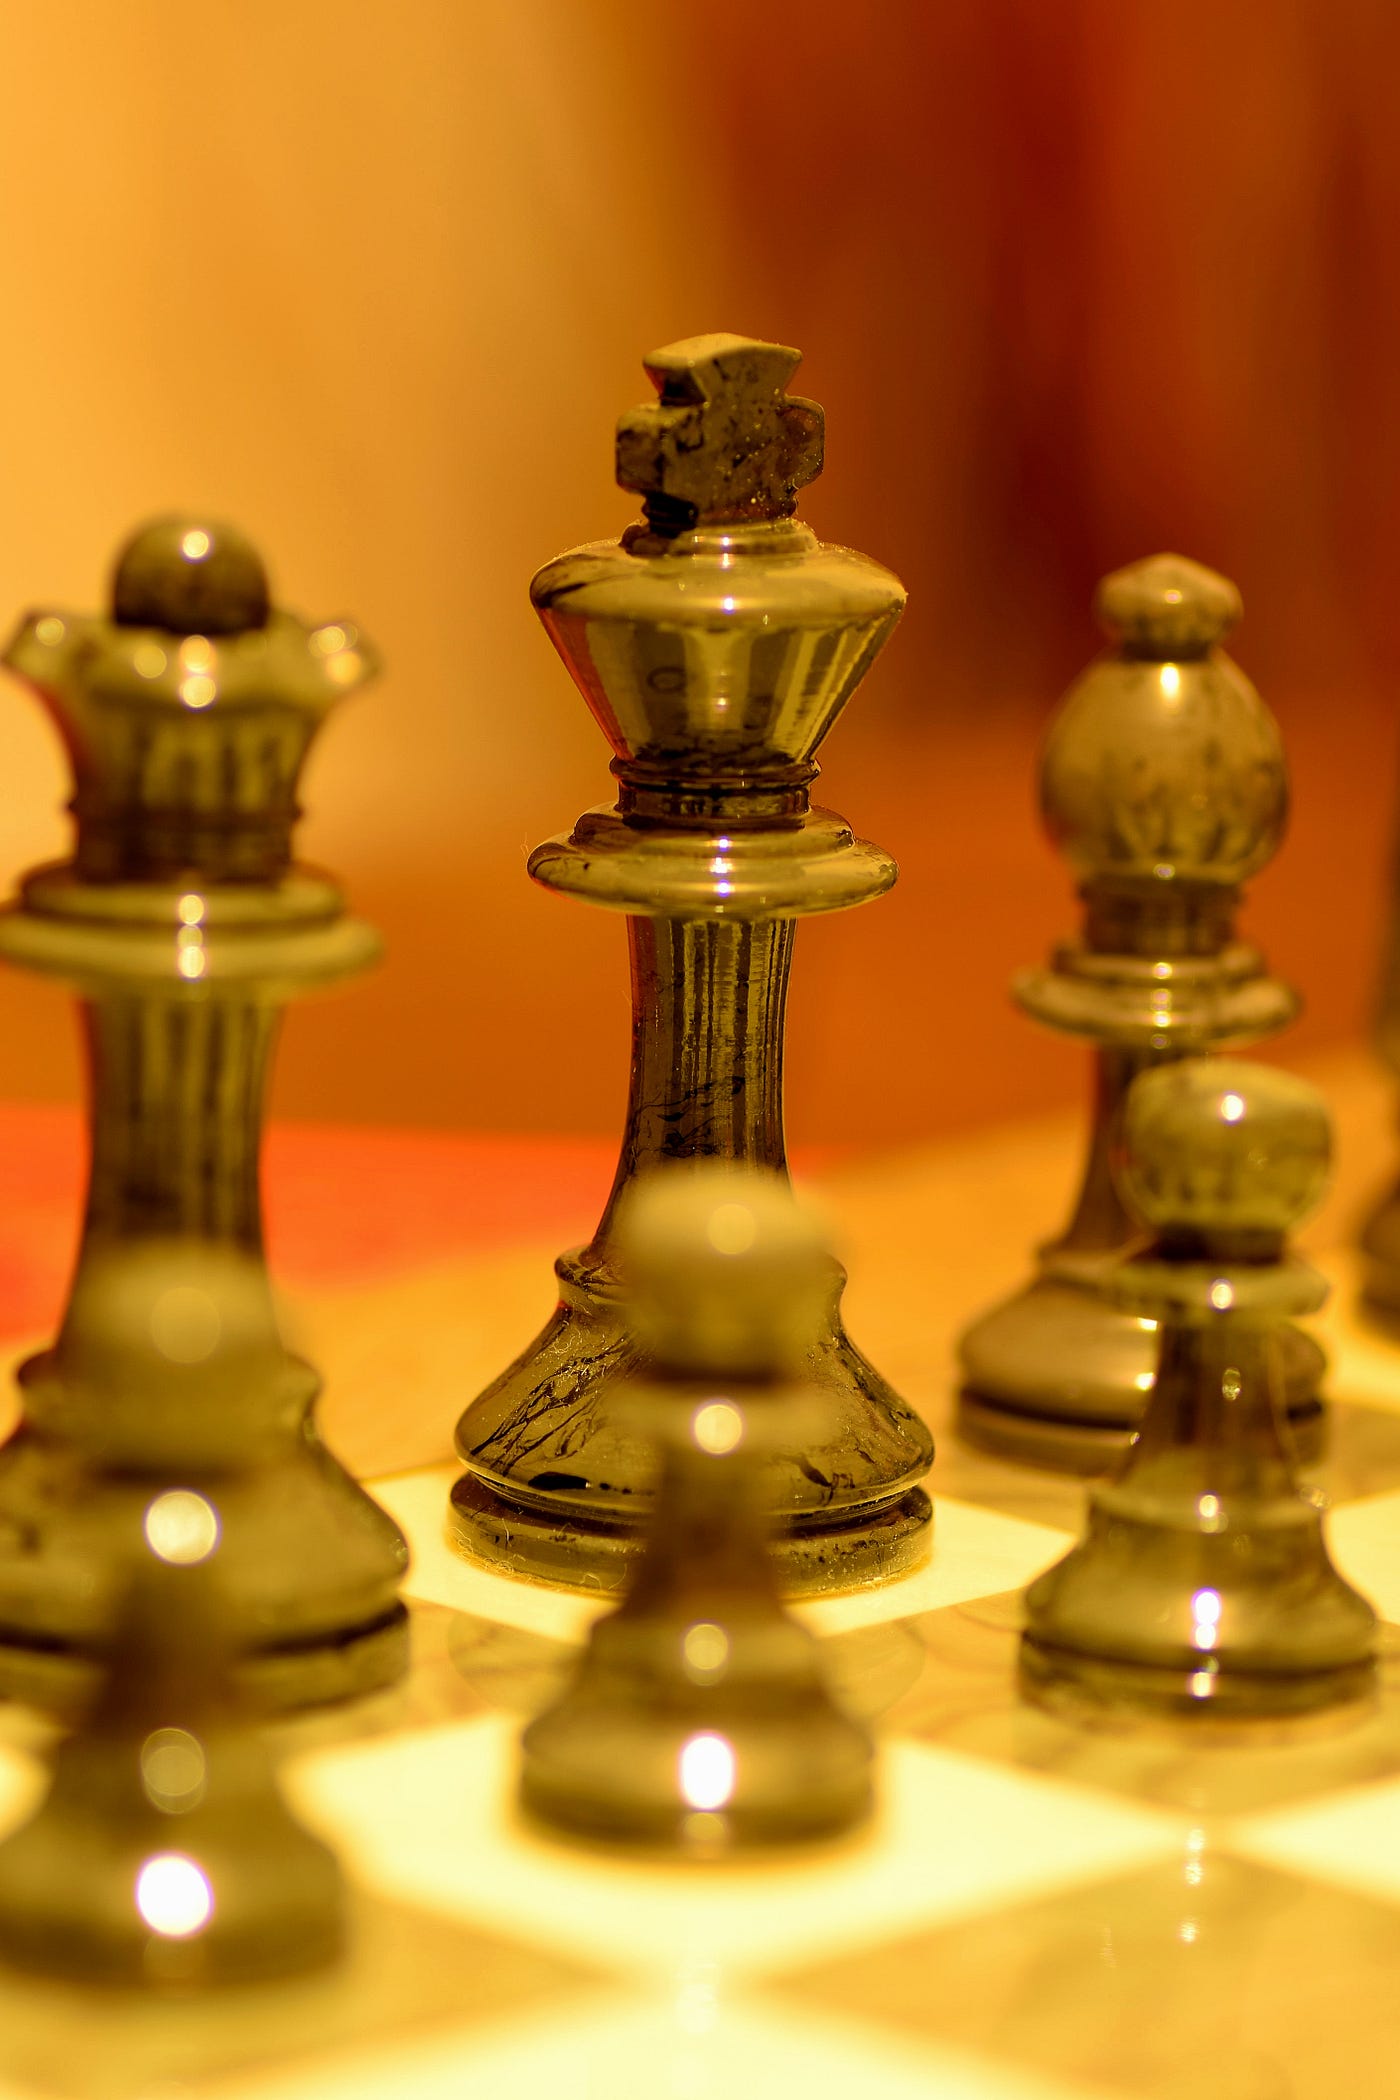 Check mates: how chess saved my mental wellbeing, Chess